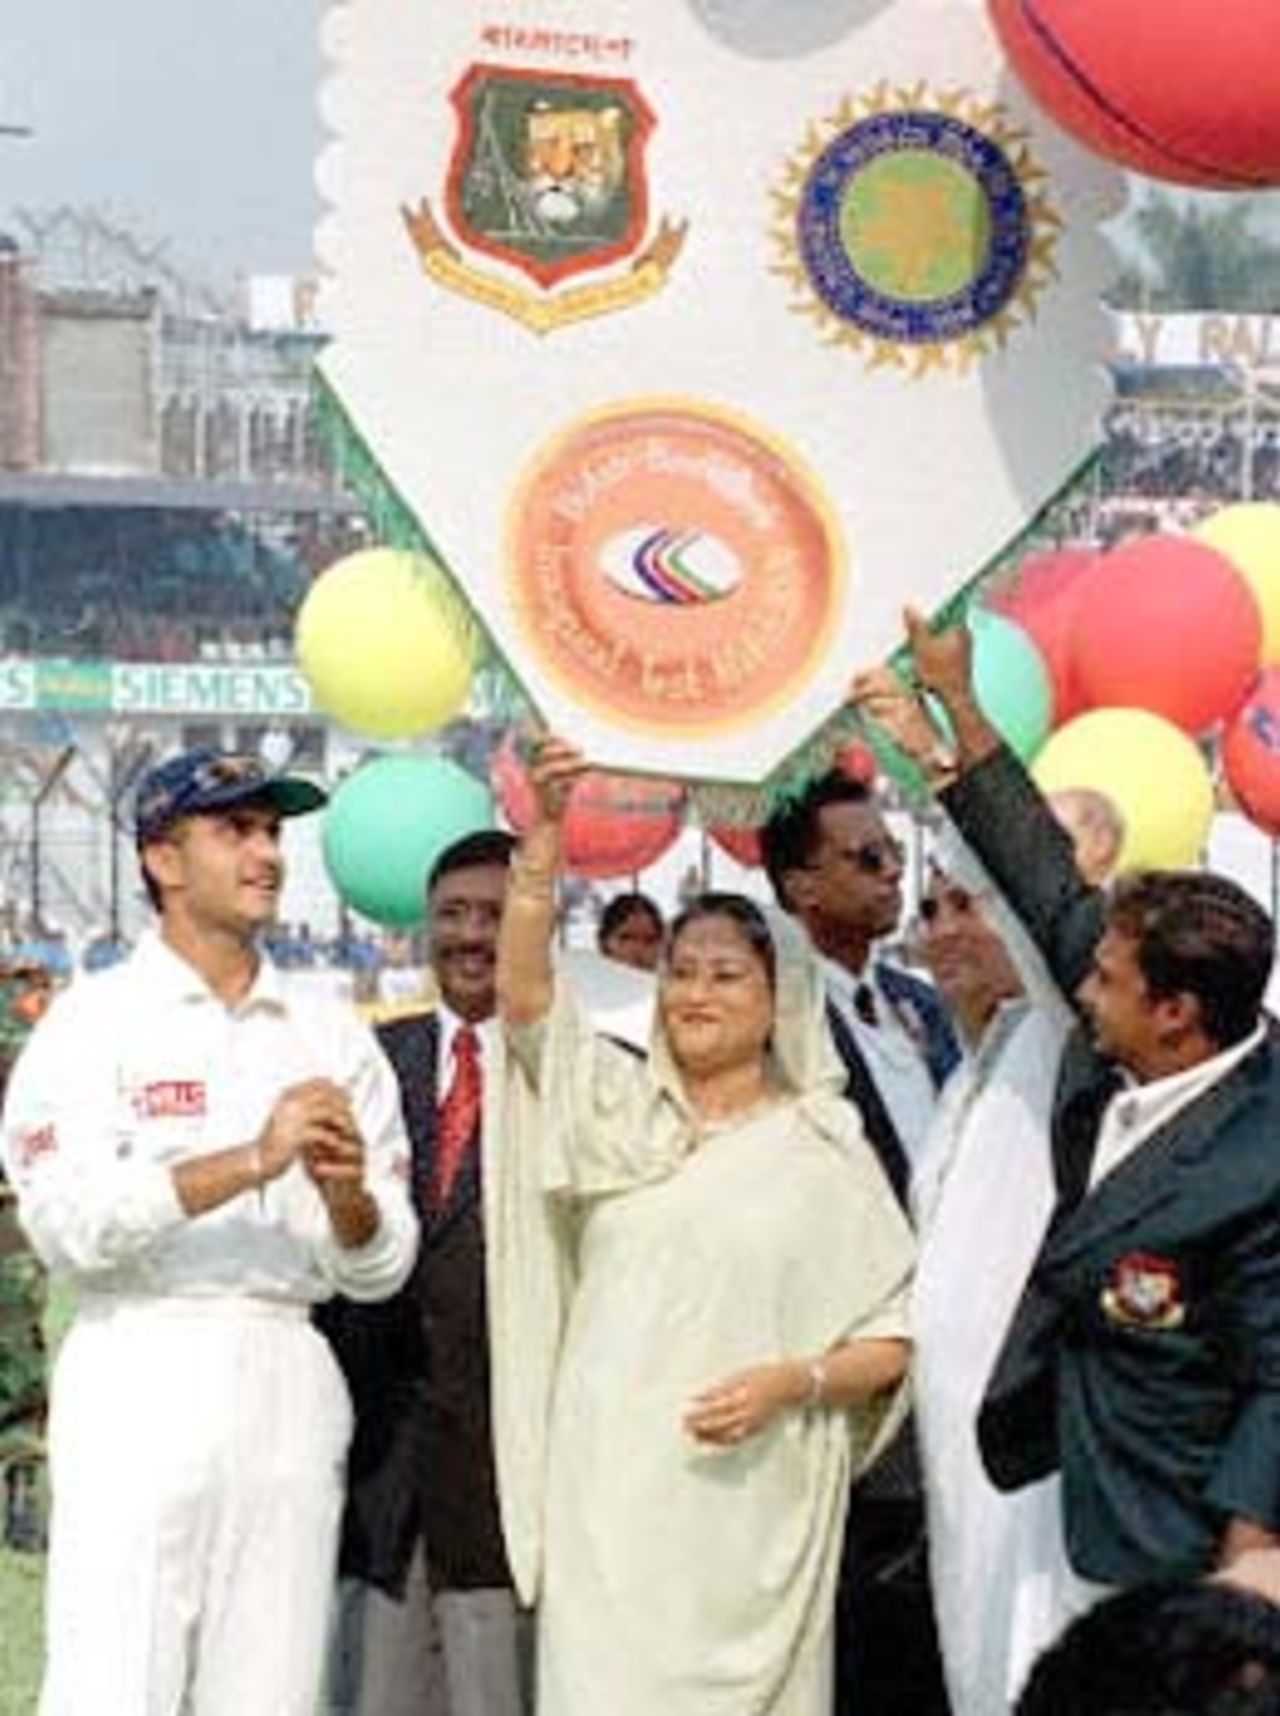 Bangladeshi Prime Minister Sheikh Hasina Wajed (C) releases a banner with colourful balloons 10 November 2000 in Dhaka, flanked by Indian skipper Saurav Ganguly (L) and his Bangladeshi counterpart Naimur Rahman (R). at this South Asian country's inaugural Test match against India. Bangladesh won the toss and elected to bat.